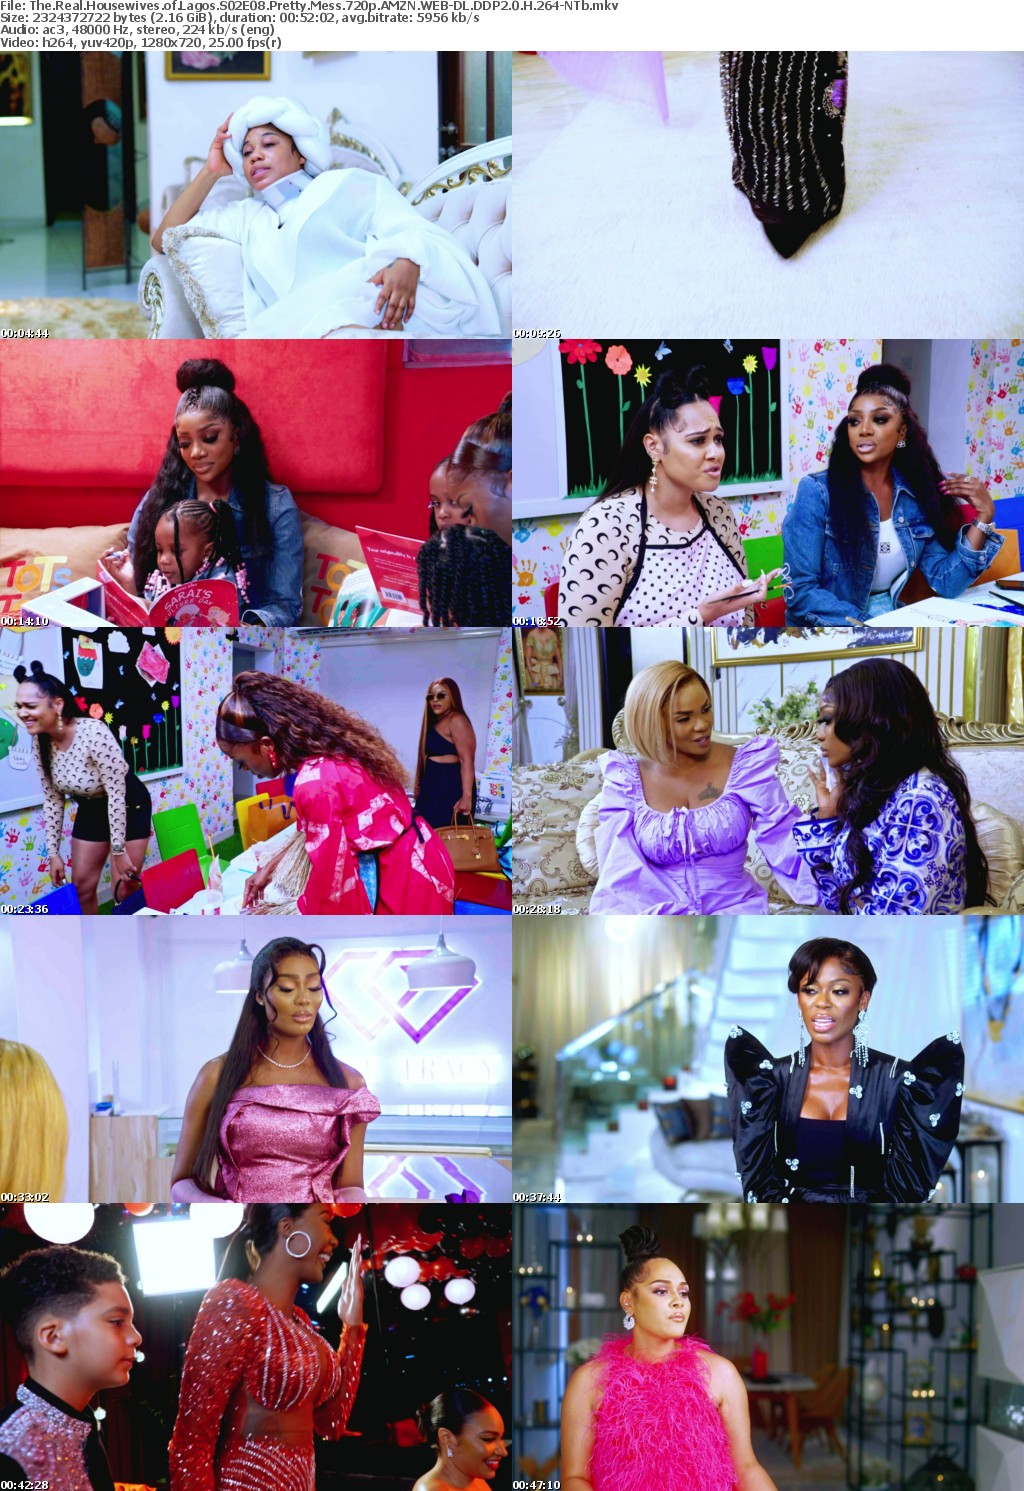 The Real Housewives of Lagos S02E08 Pretty Mess 720p AMZN WEB-DL DDP2 0 H 264-NTb